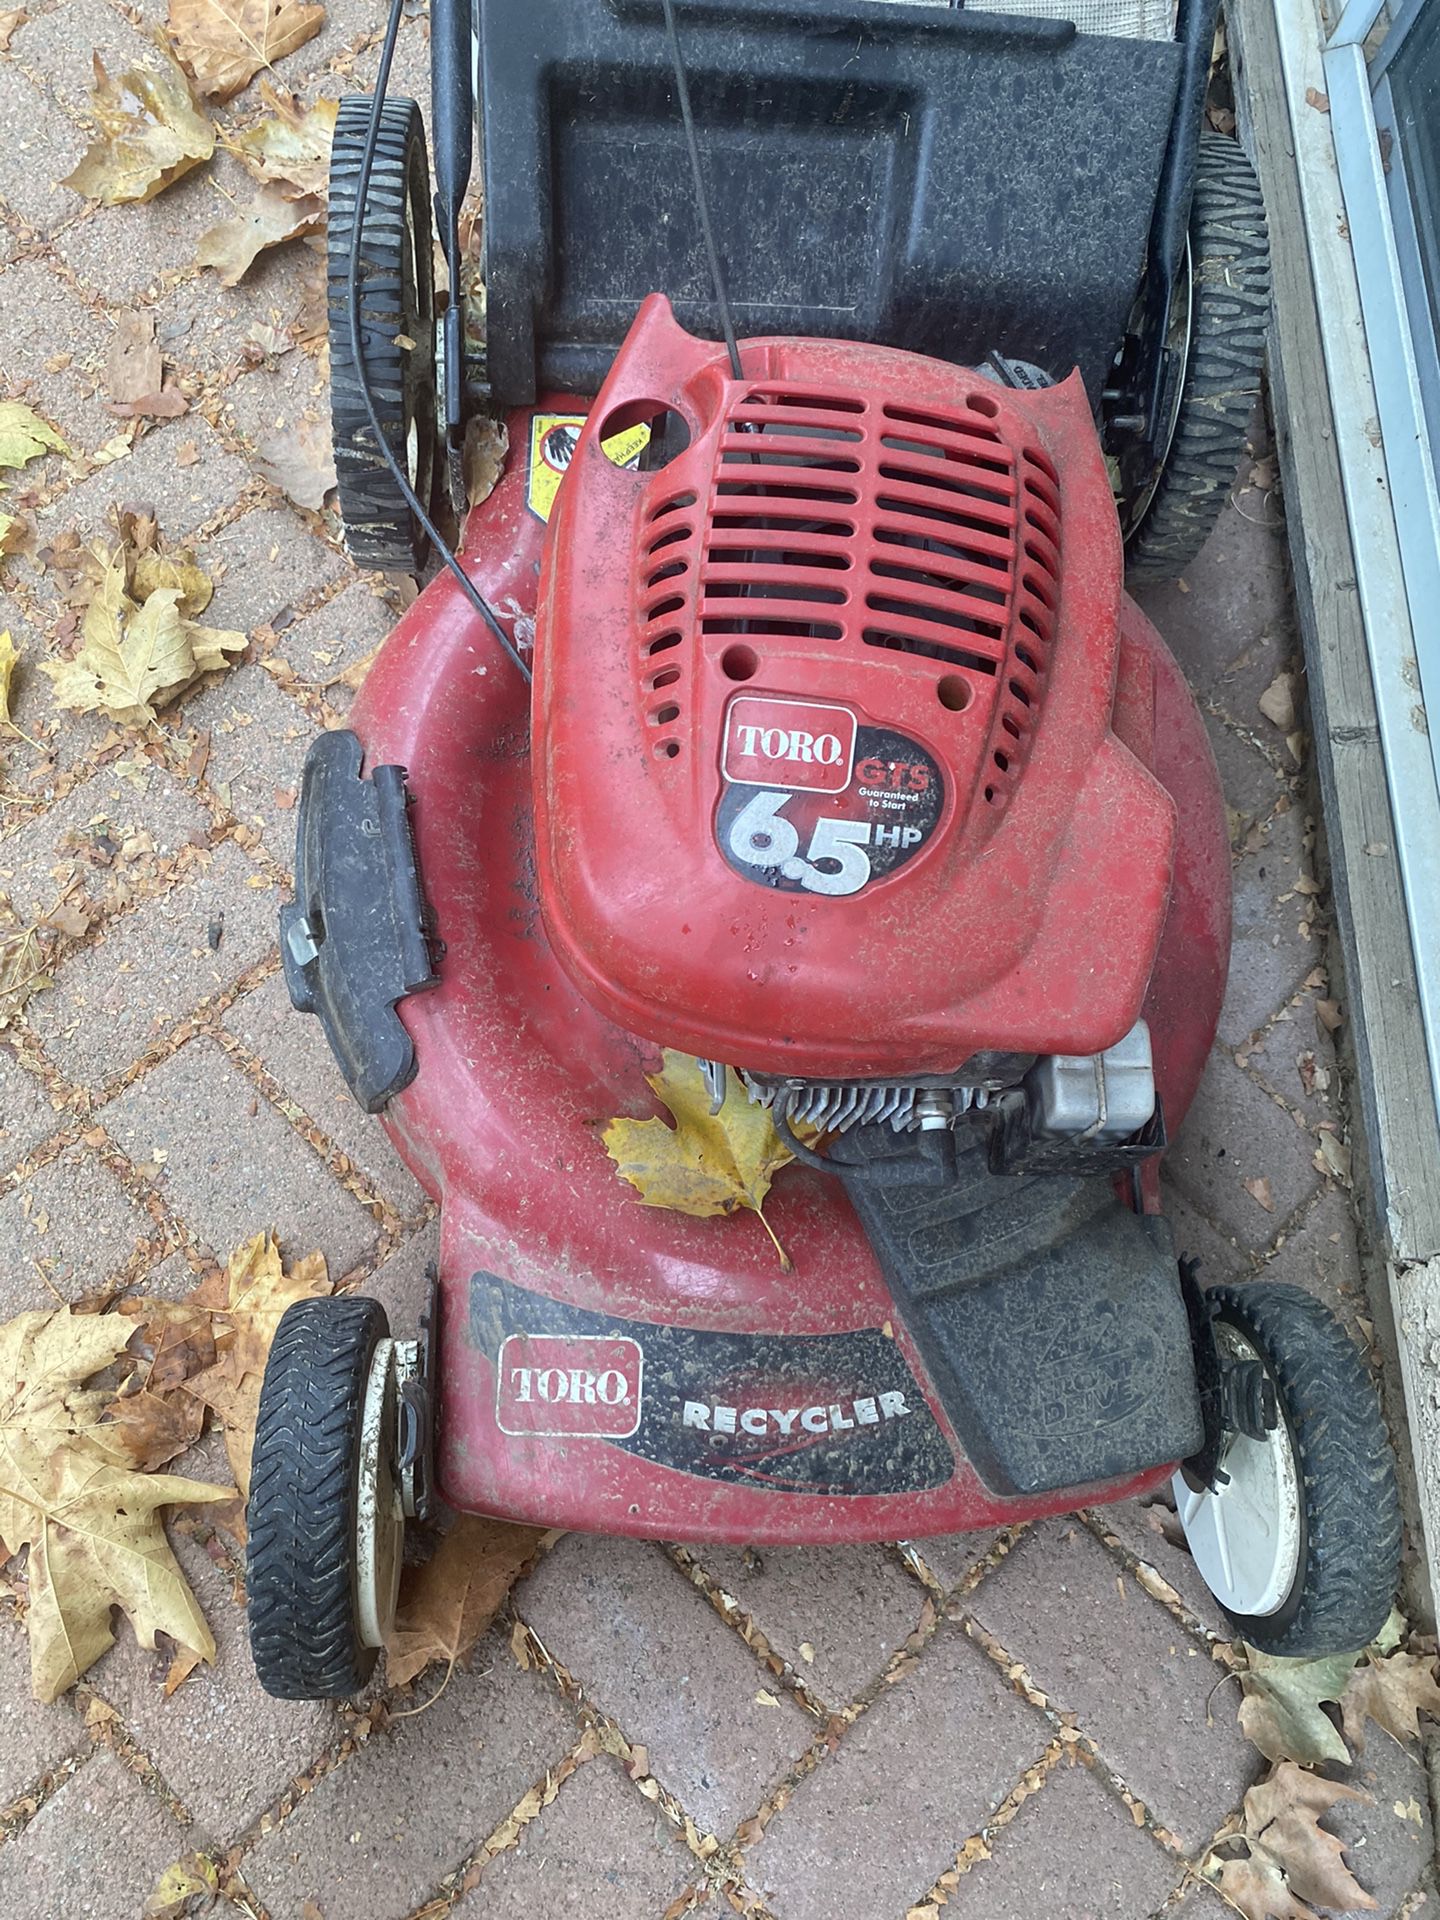 Toro Lawnmower Comes With New Parts!